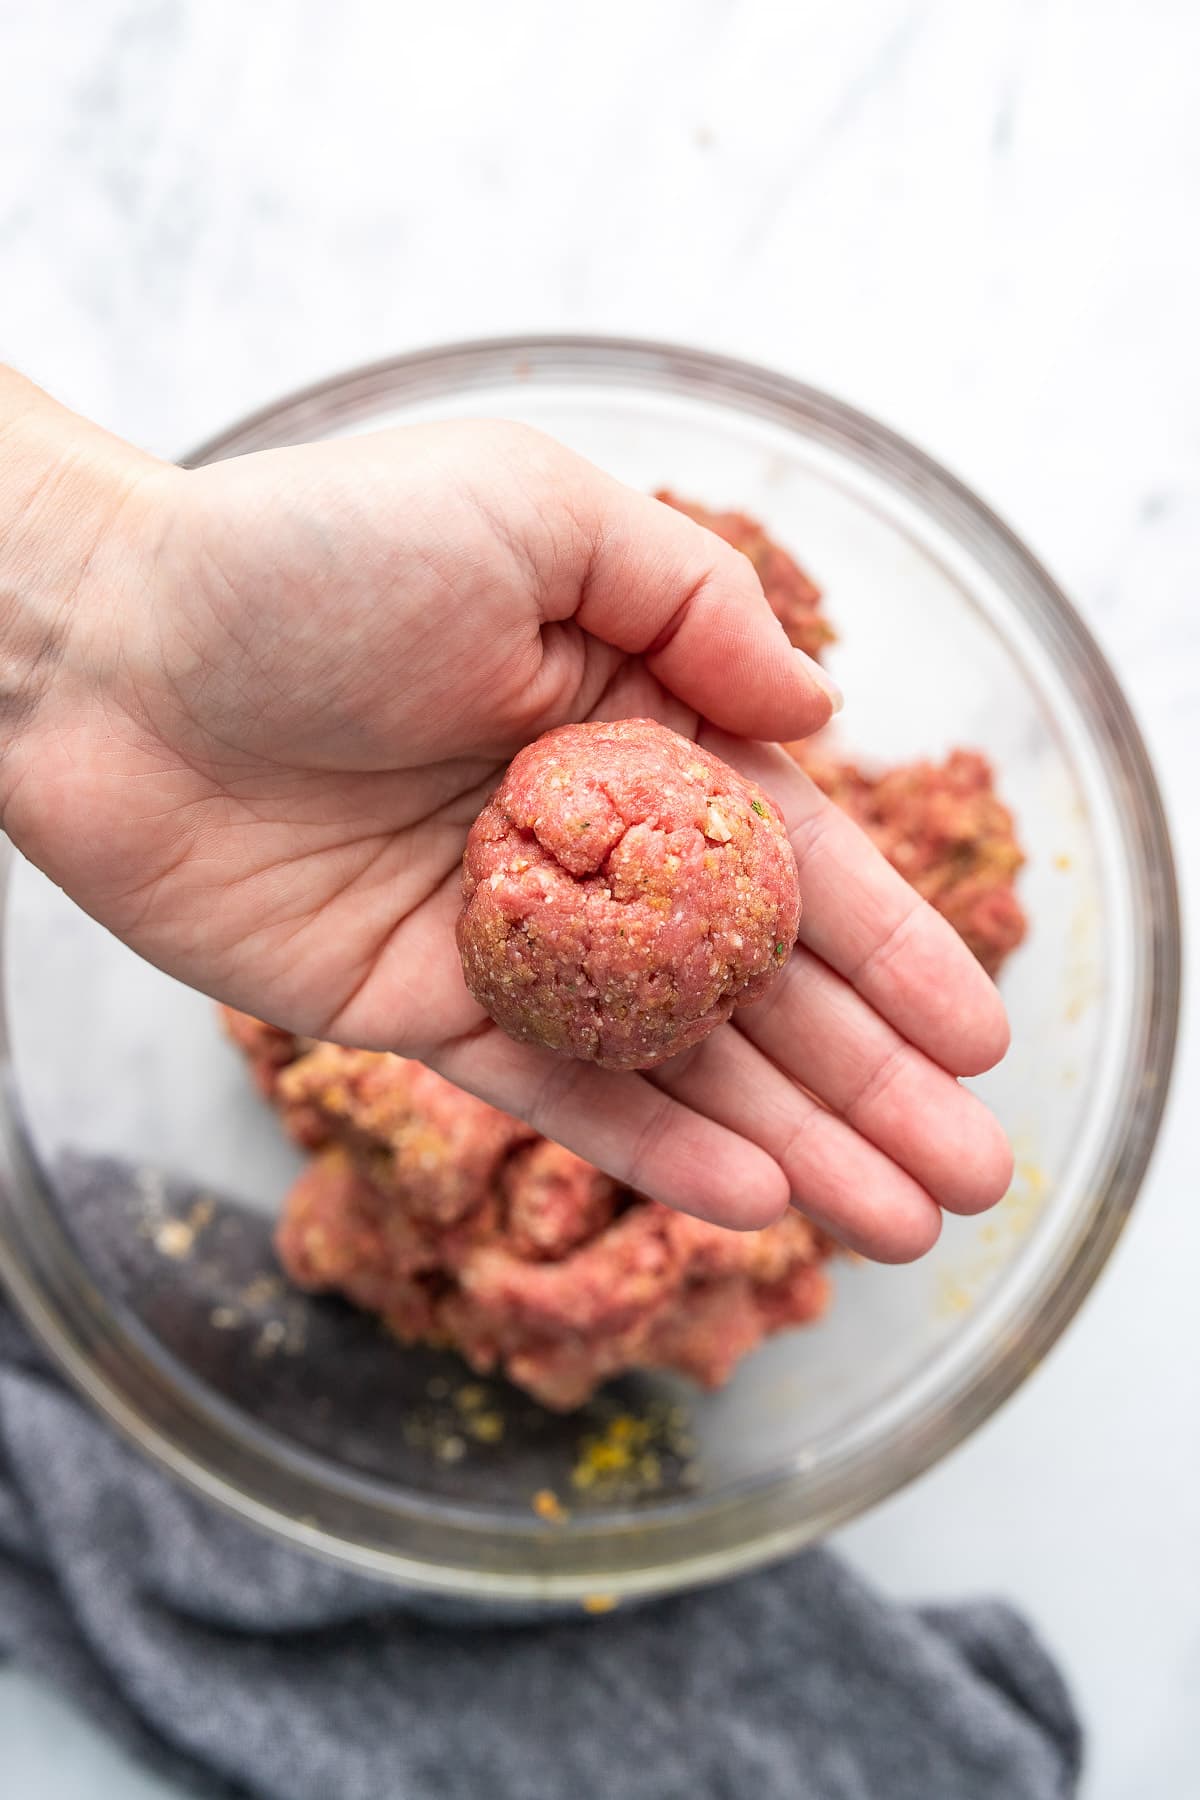 A hand holding a single freshly formed Parmesan meatball.